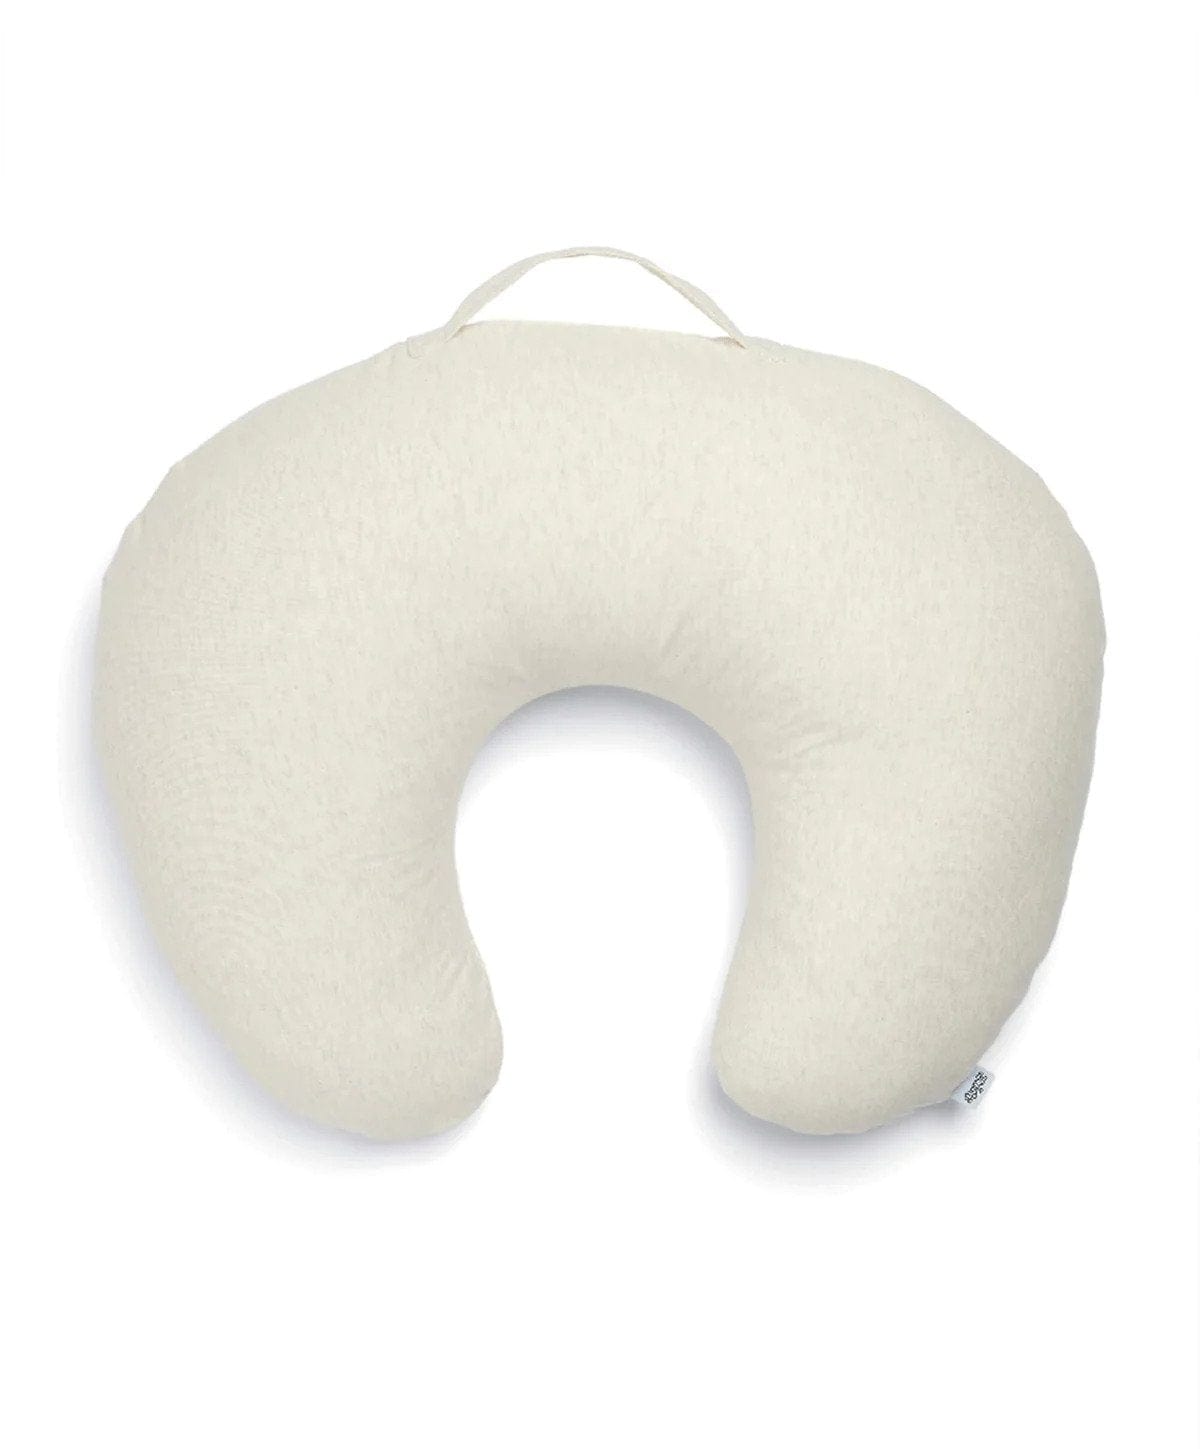 Ergobaby feeding & weaning Welcome to the World Seedling Nursing Pillow - Oatmeal Marl 502256800